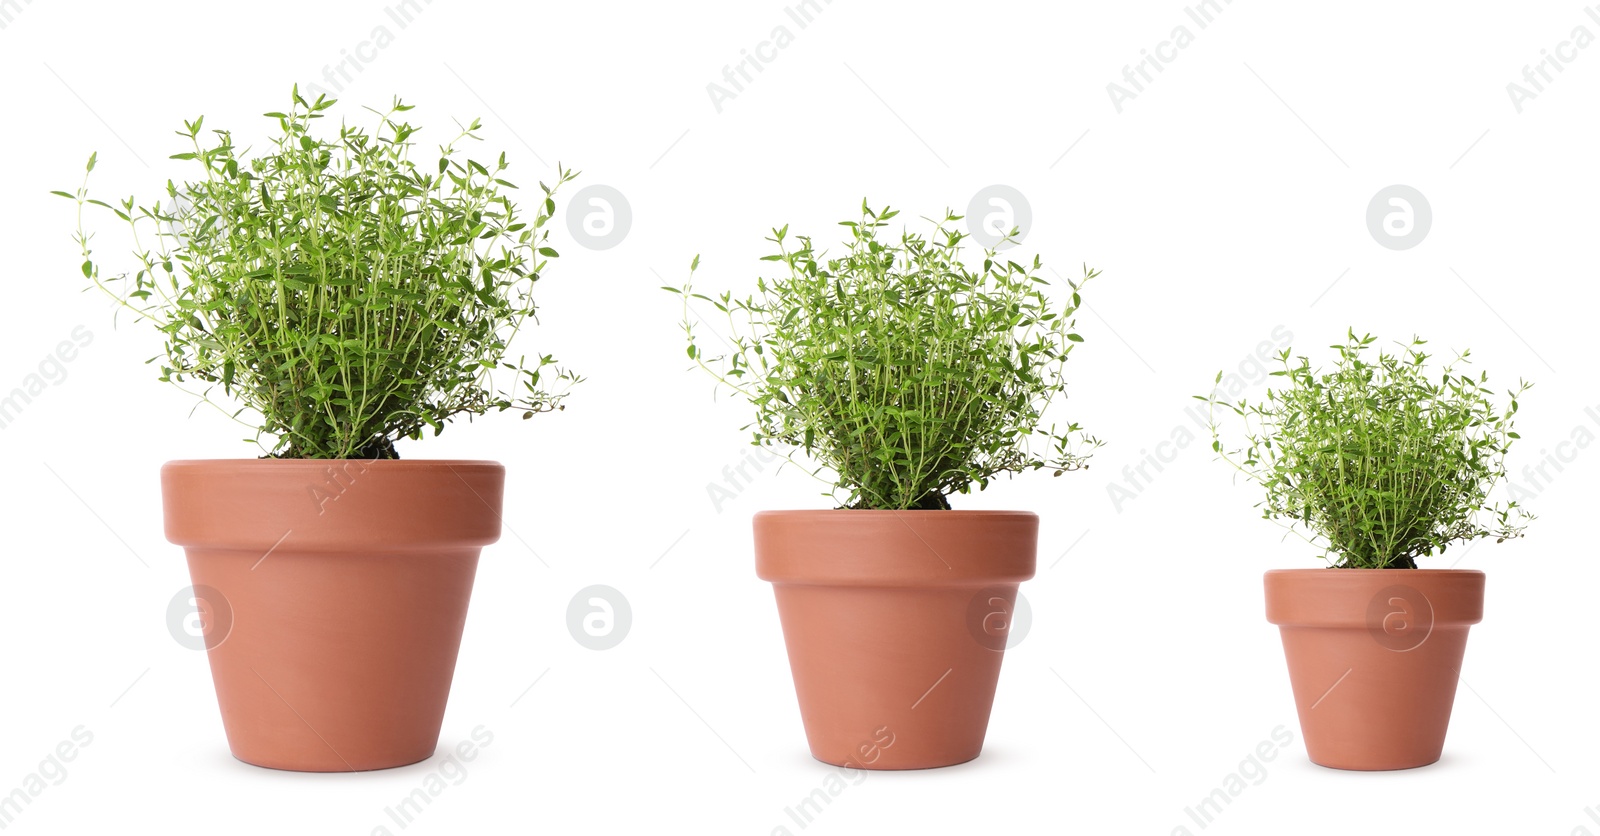 Image of Thyme growing in pots isolated on white, different sizes